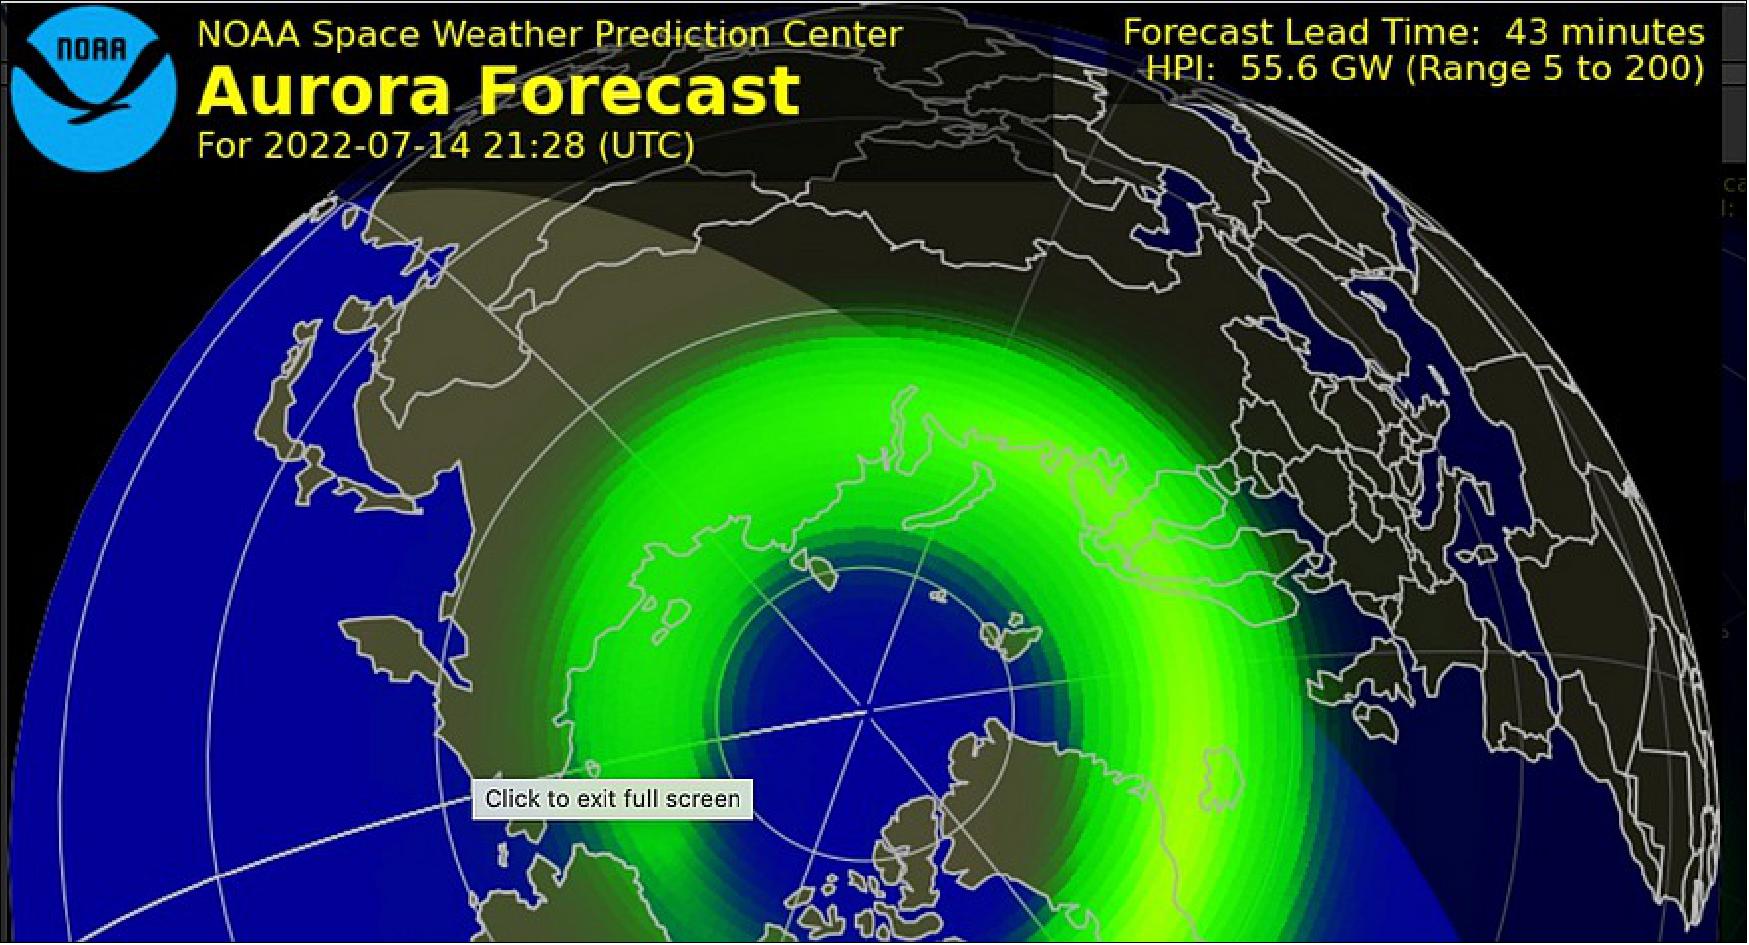 Figure 6: NOAA supplies products and data related to space weather including this 30-minute Aurora Forecast (image credit: NOAA Space Weather Prediction Center)